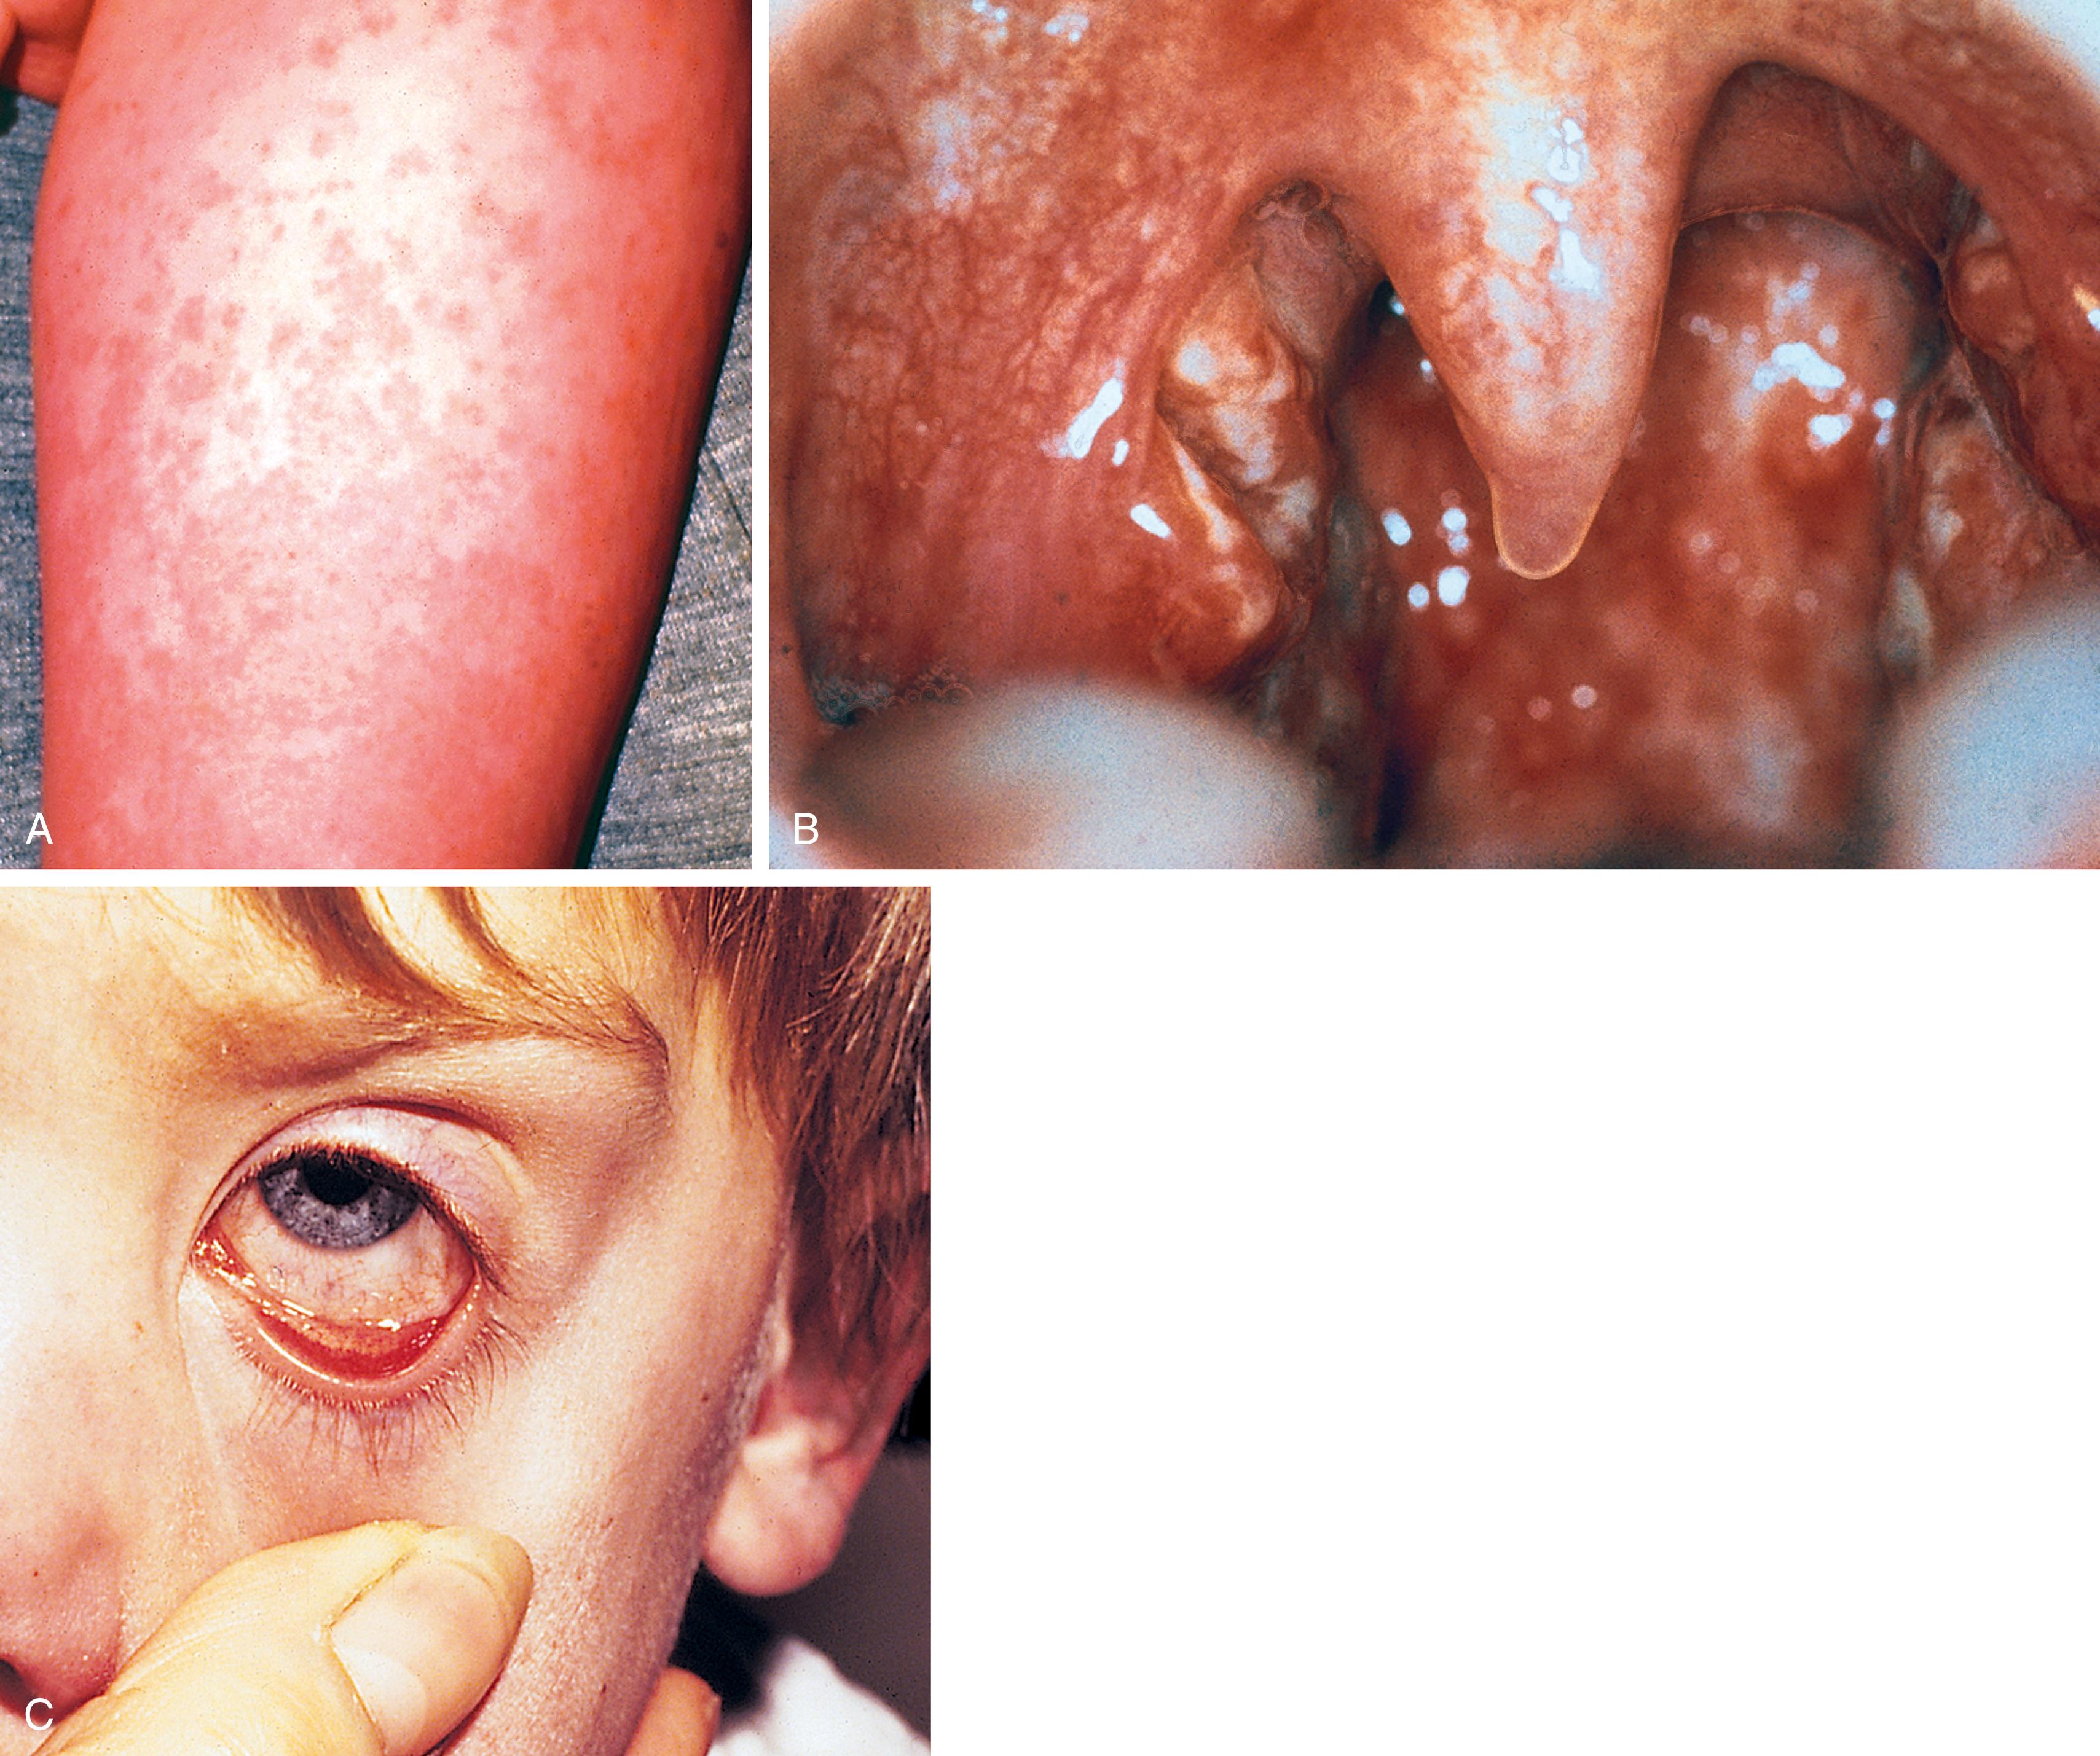 Fig. 13.1, Adenovirus. (A) This discrete, erythematous, blanching maculopapular rash was generalized when first noted and occurred in association with pharyngitis (B) and a nonpurulent conjunctivitis (C).